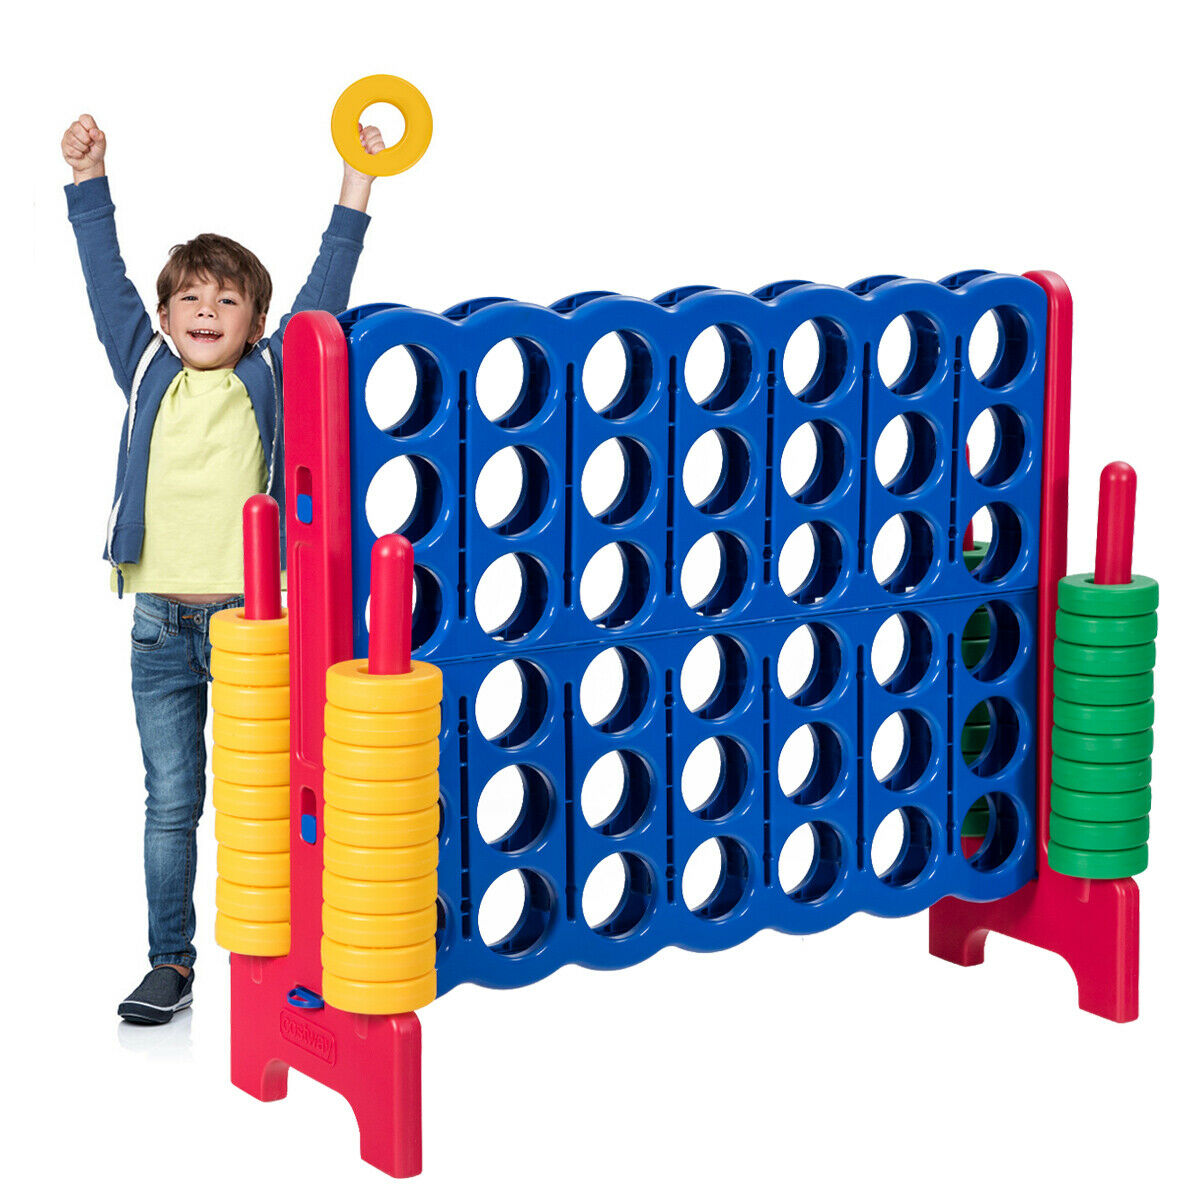 Giant Yard Games Kids Party Toy Indoor Jumbo 4 In A Row Outside Adults Large Fun